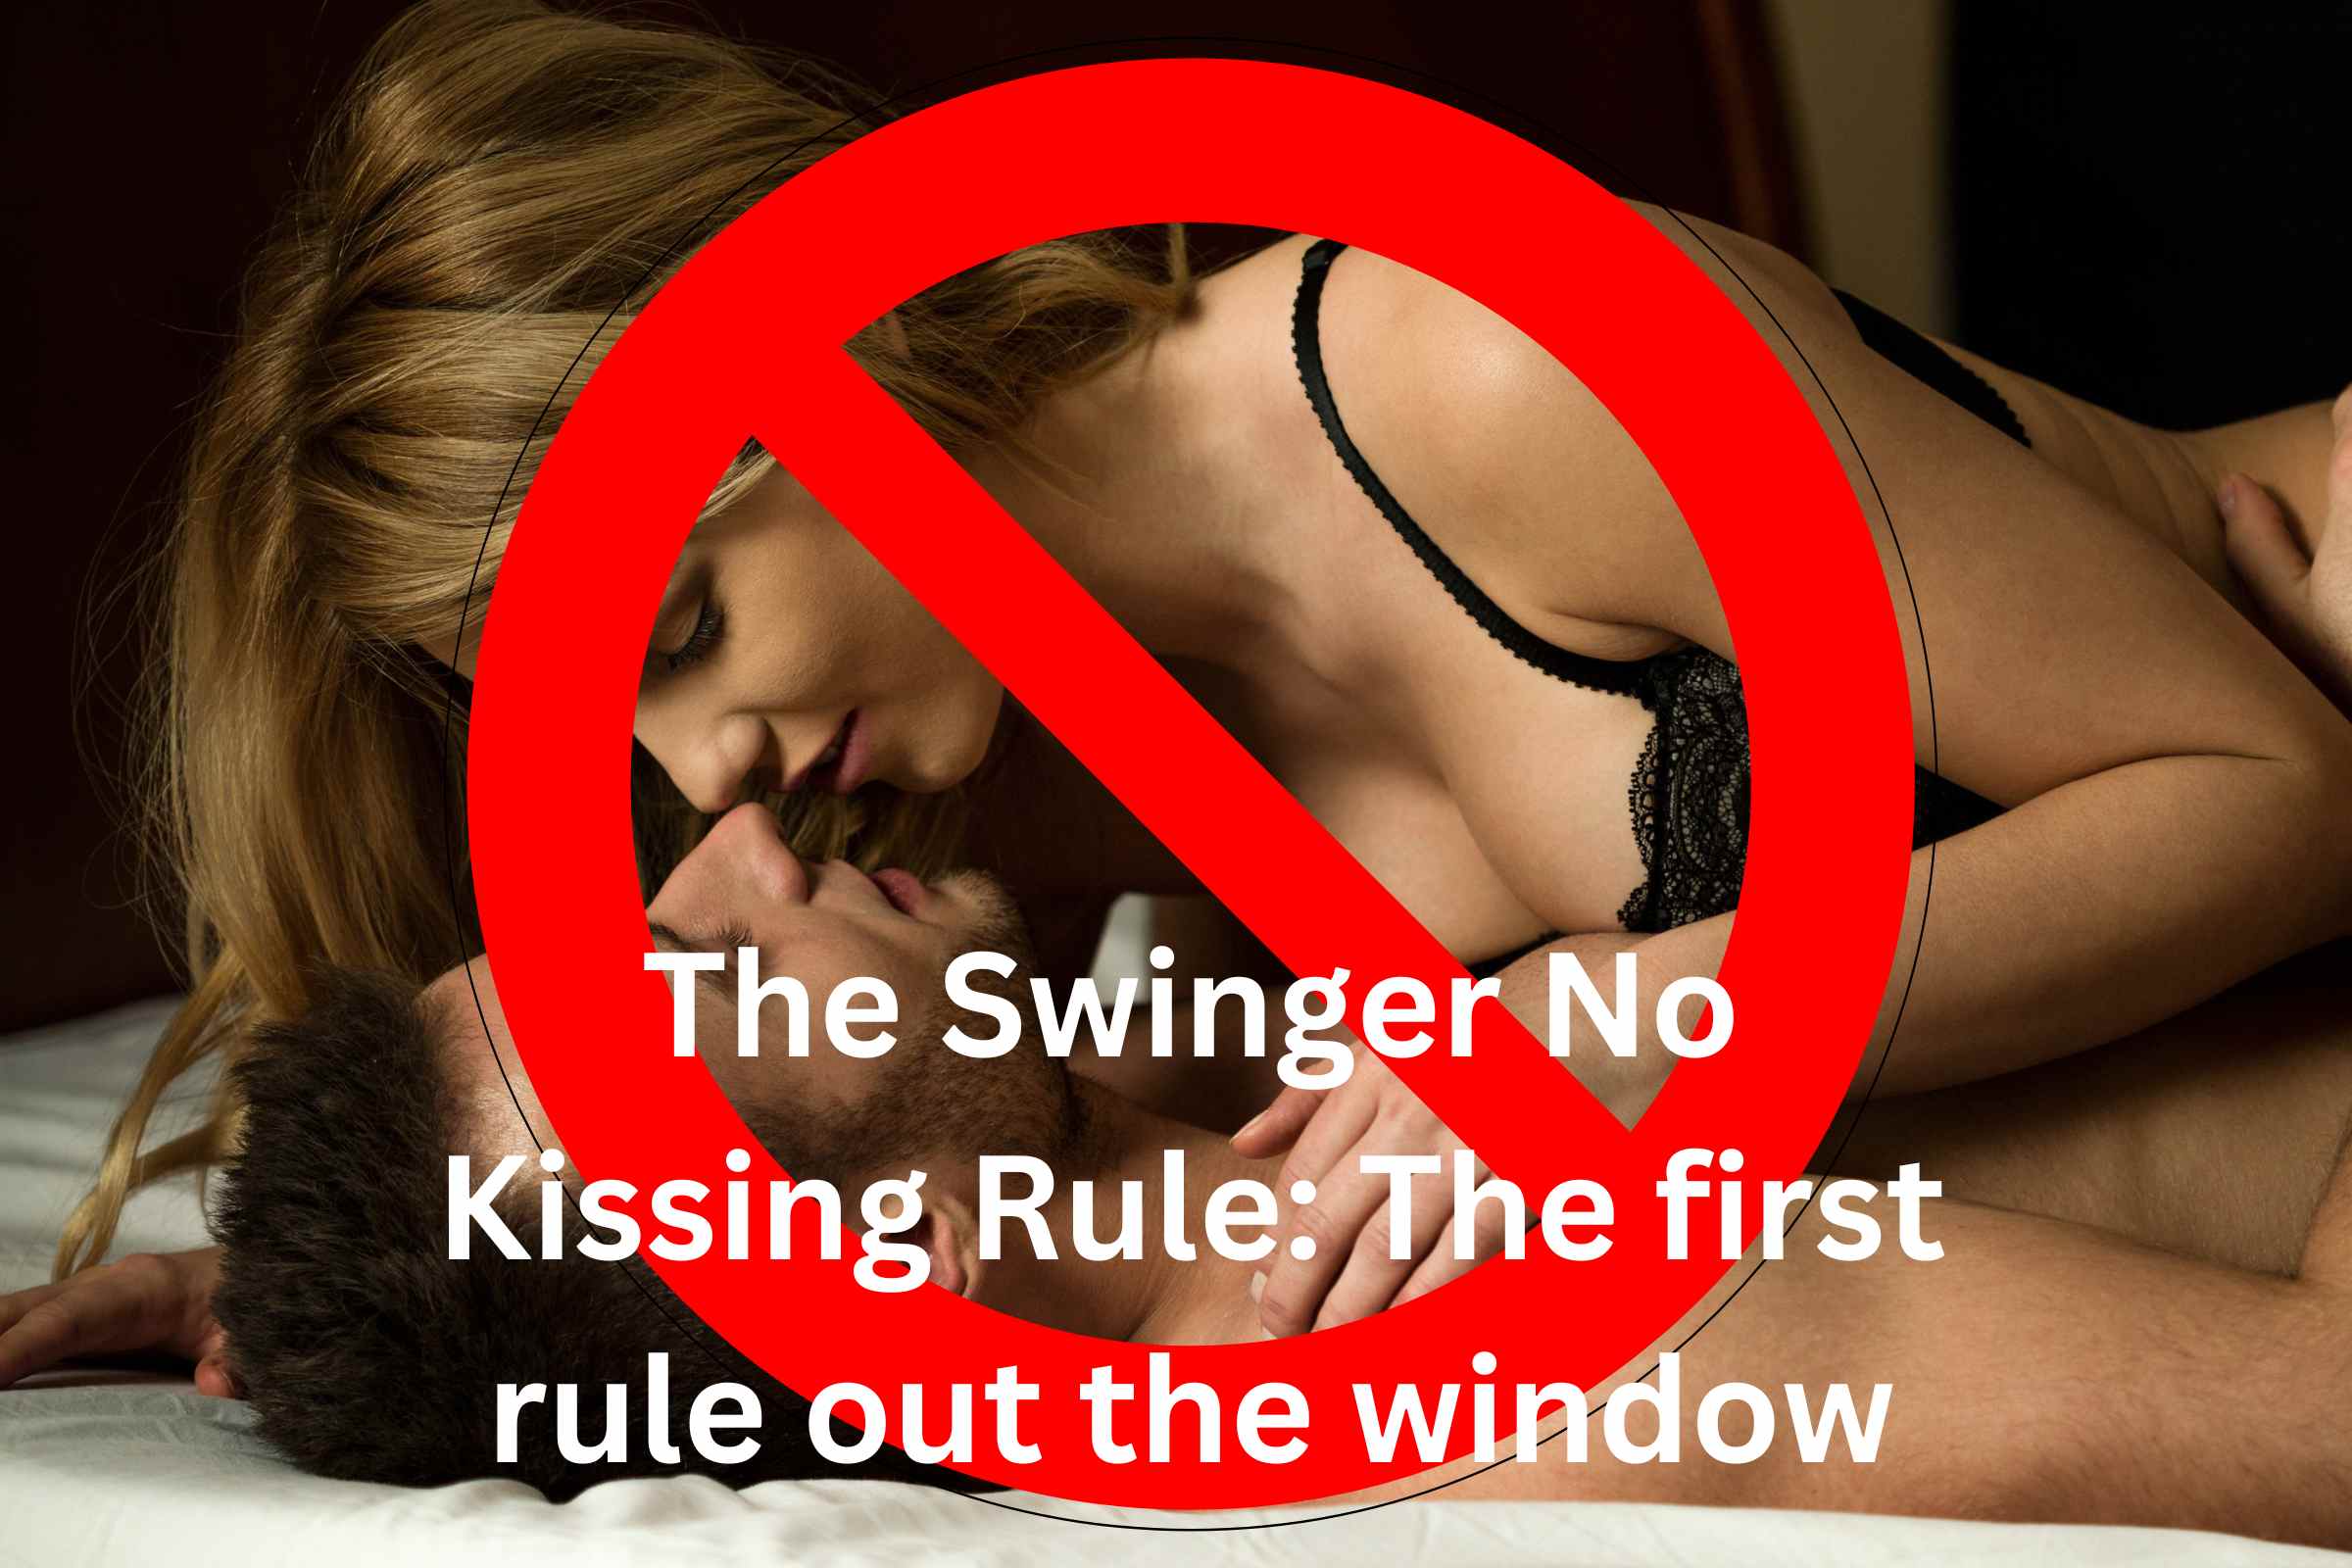 2023 The Swinger No Kissing Rule The first rule out the window